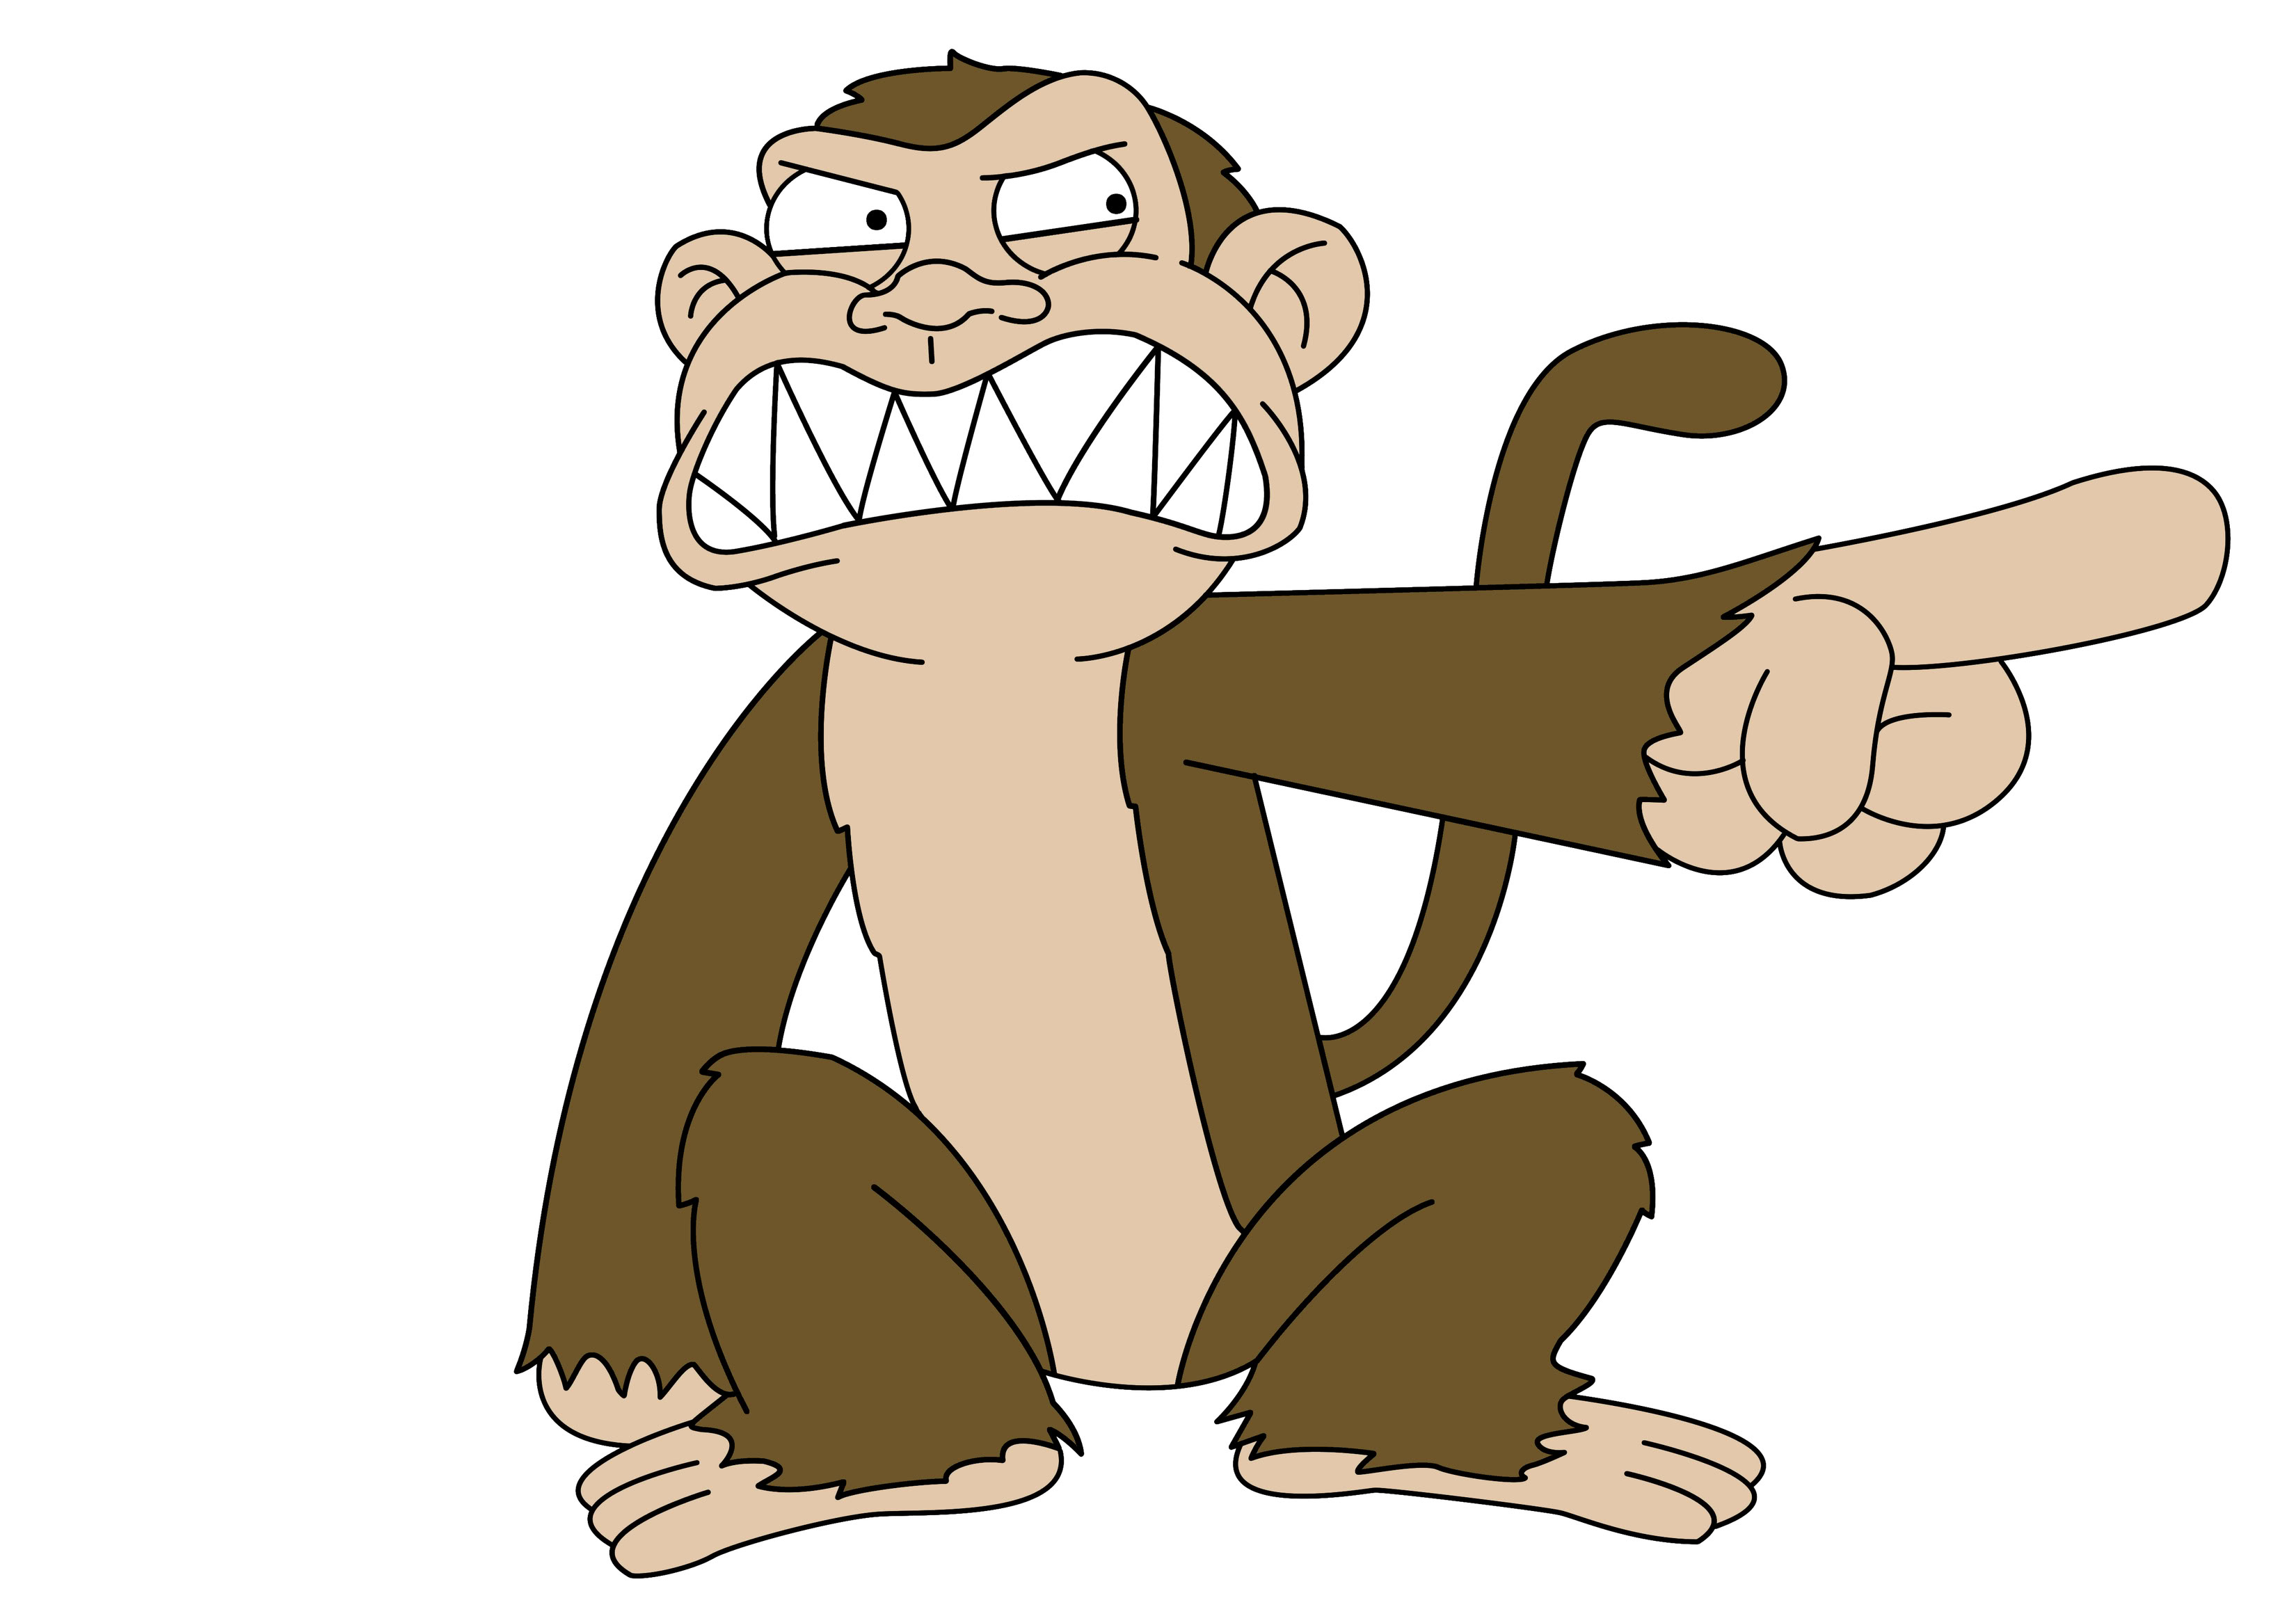 There's an evil monkey in my closet! - endorphin User Community